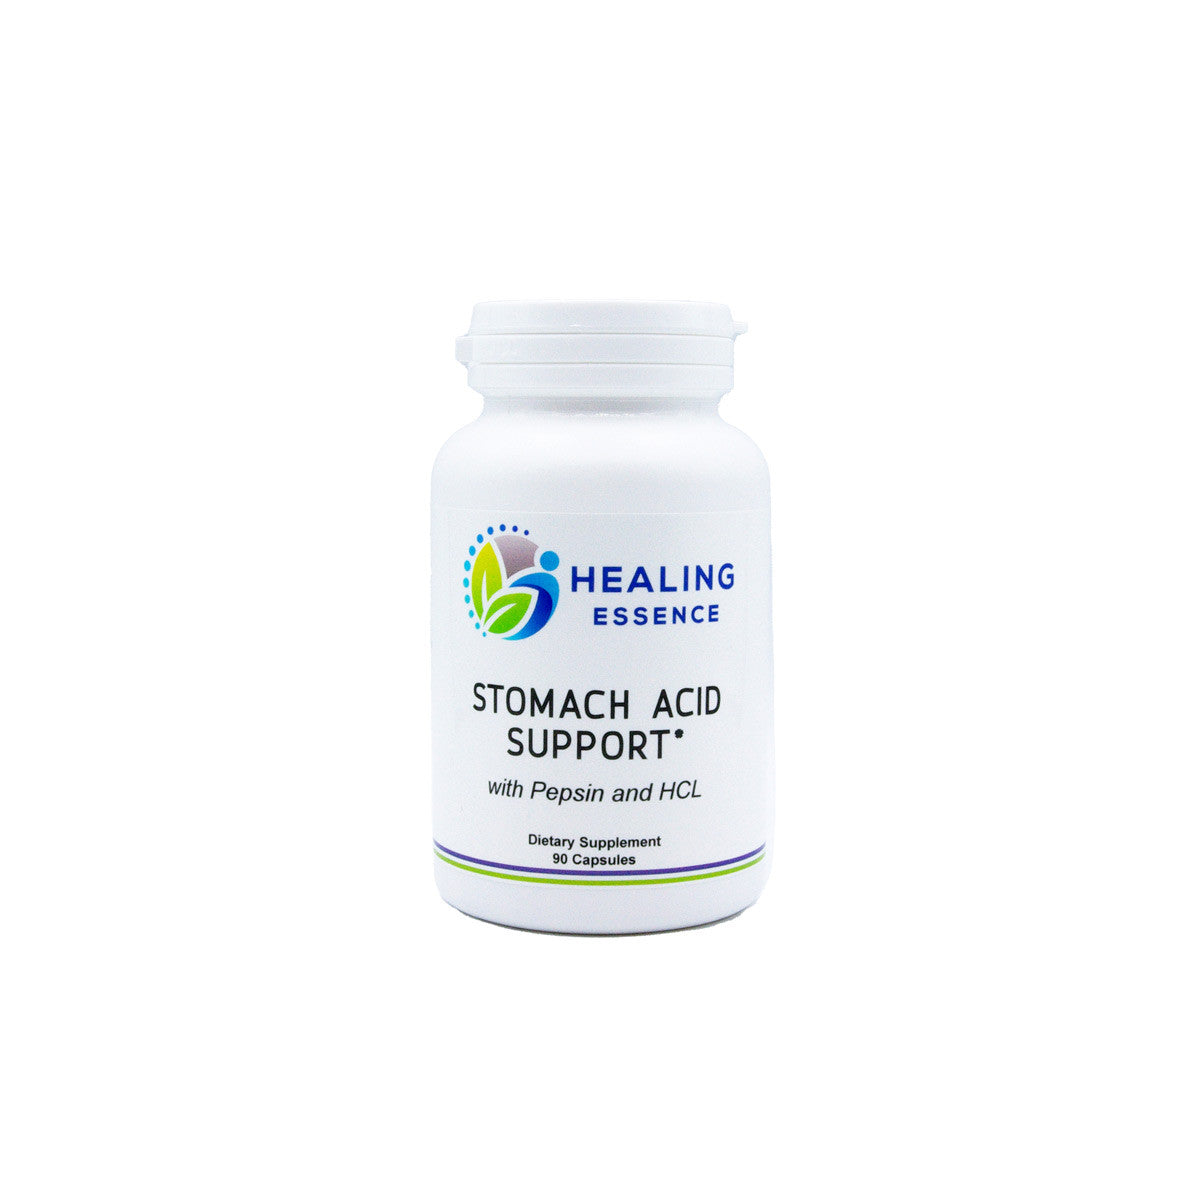 Stomach Acid Support (with Pepsin and HCL)